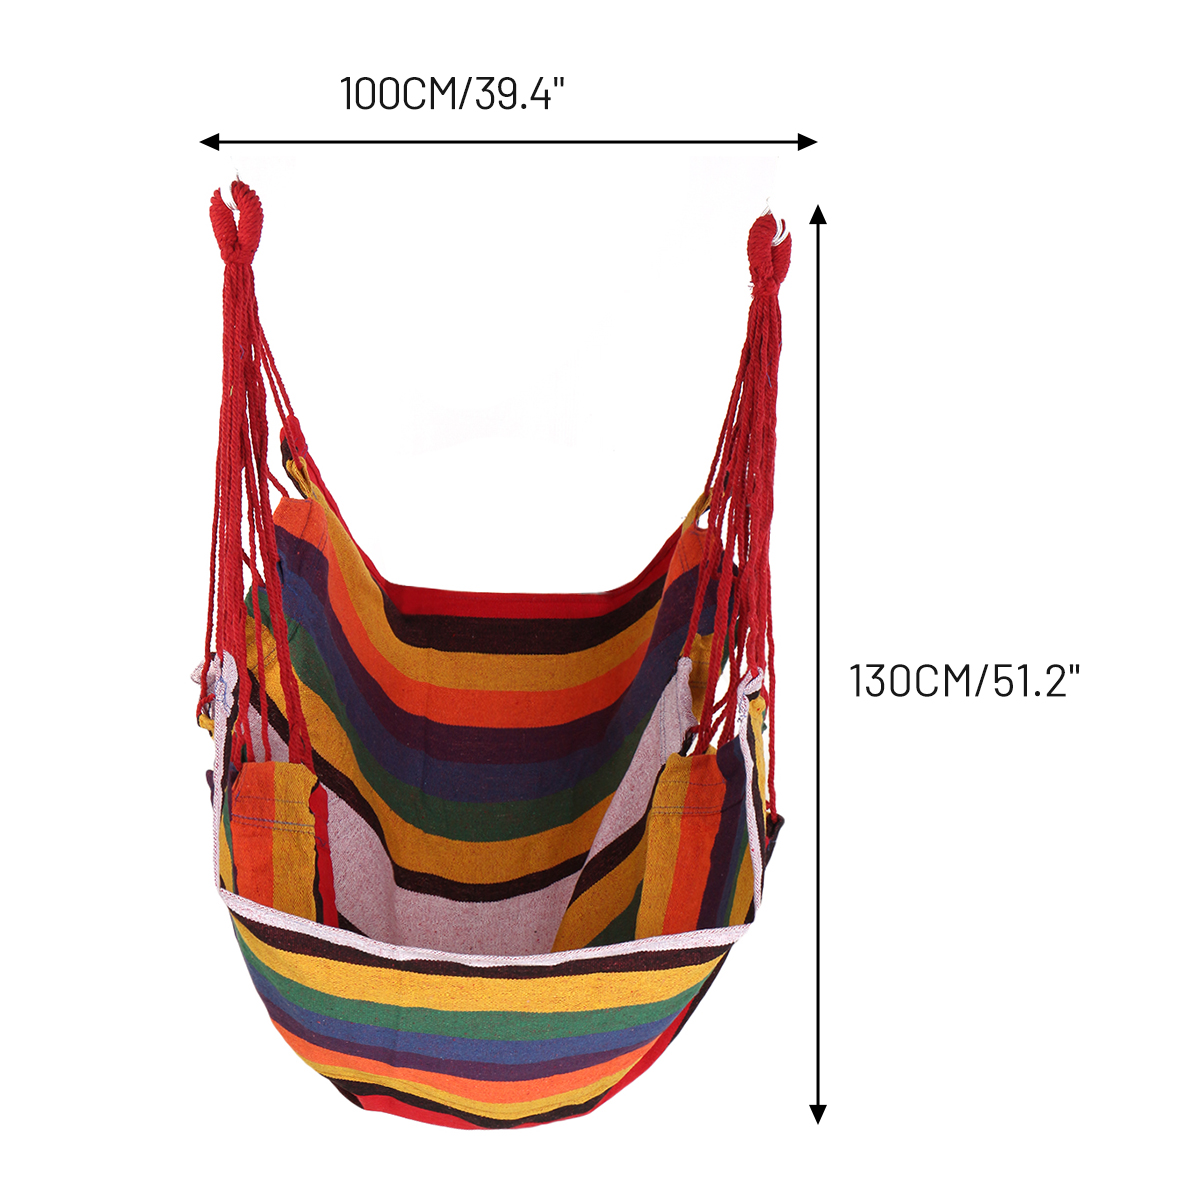 Deluxe-Camping-Portable-Hammock-Hanging-Rope-Chair-Porch-Swing-Patio-Yard-Seat-Camping-Indoor-Outdoo-1698997-15